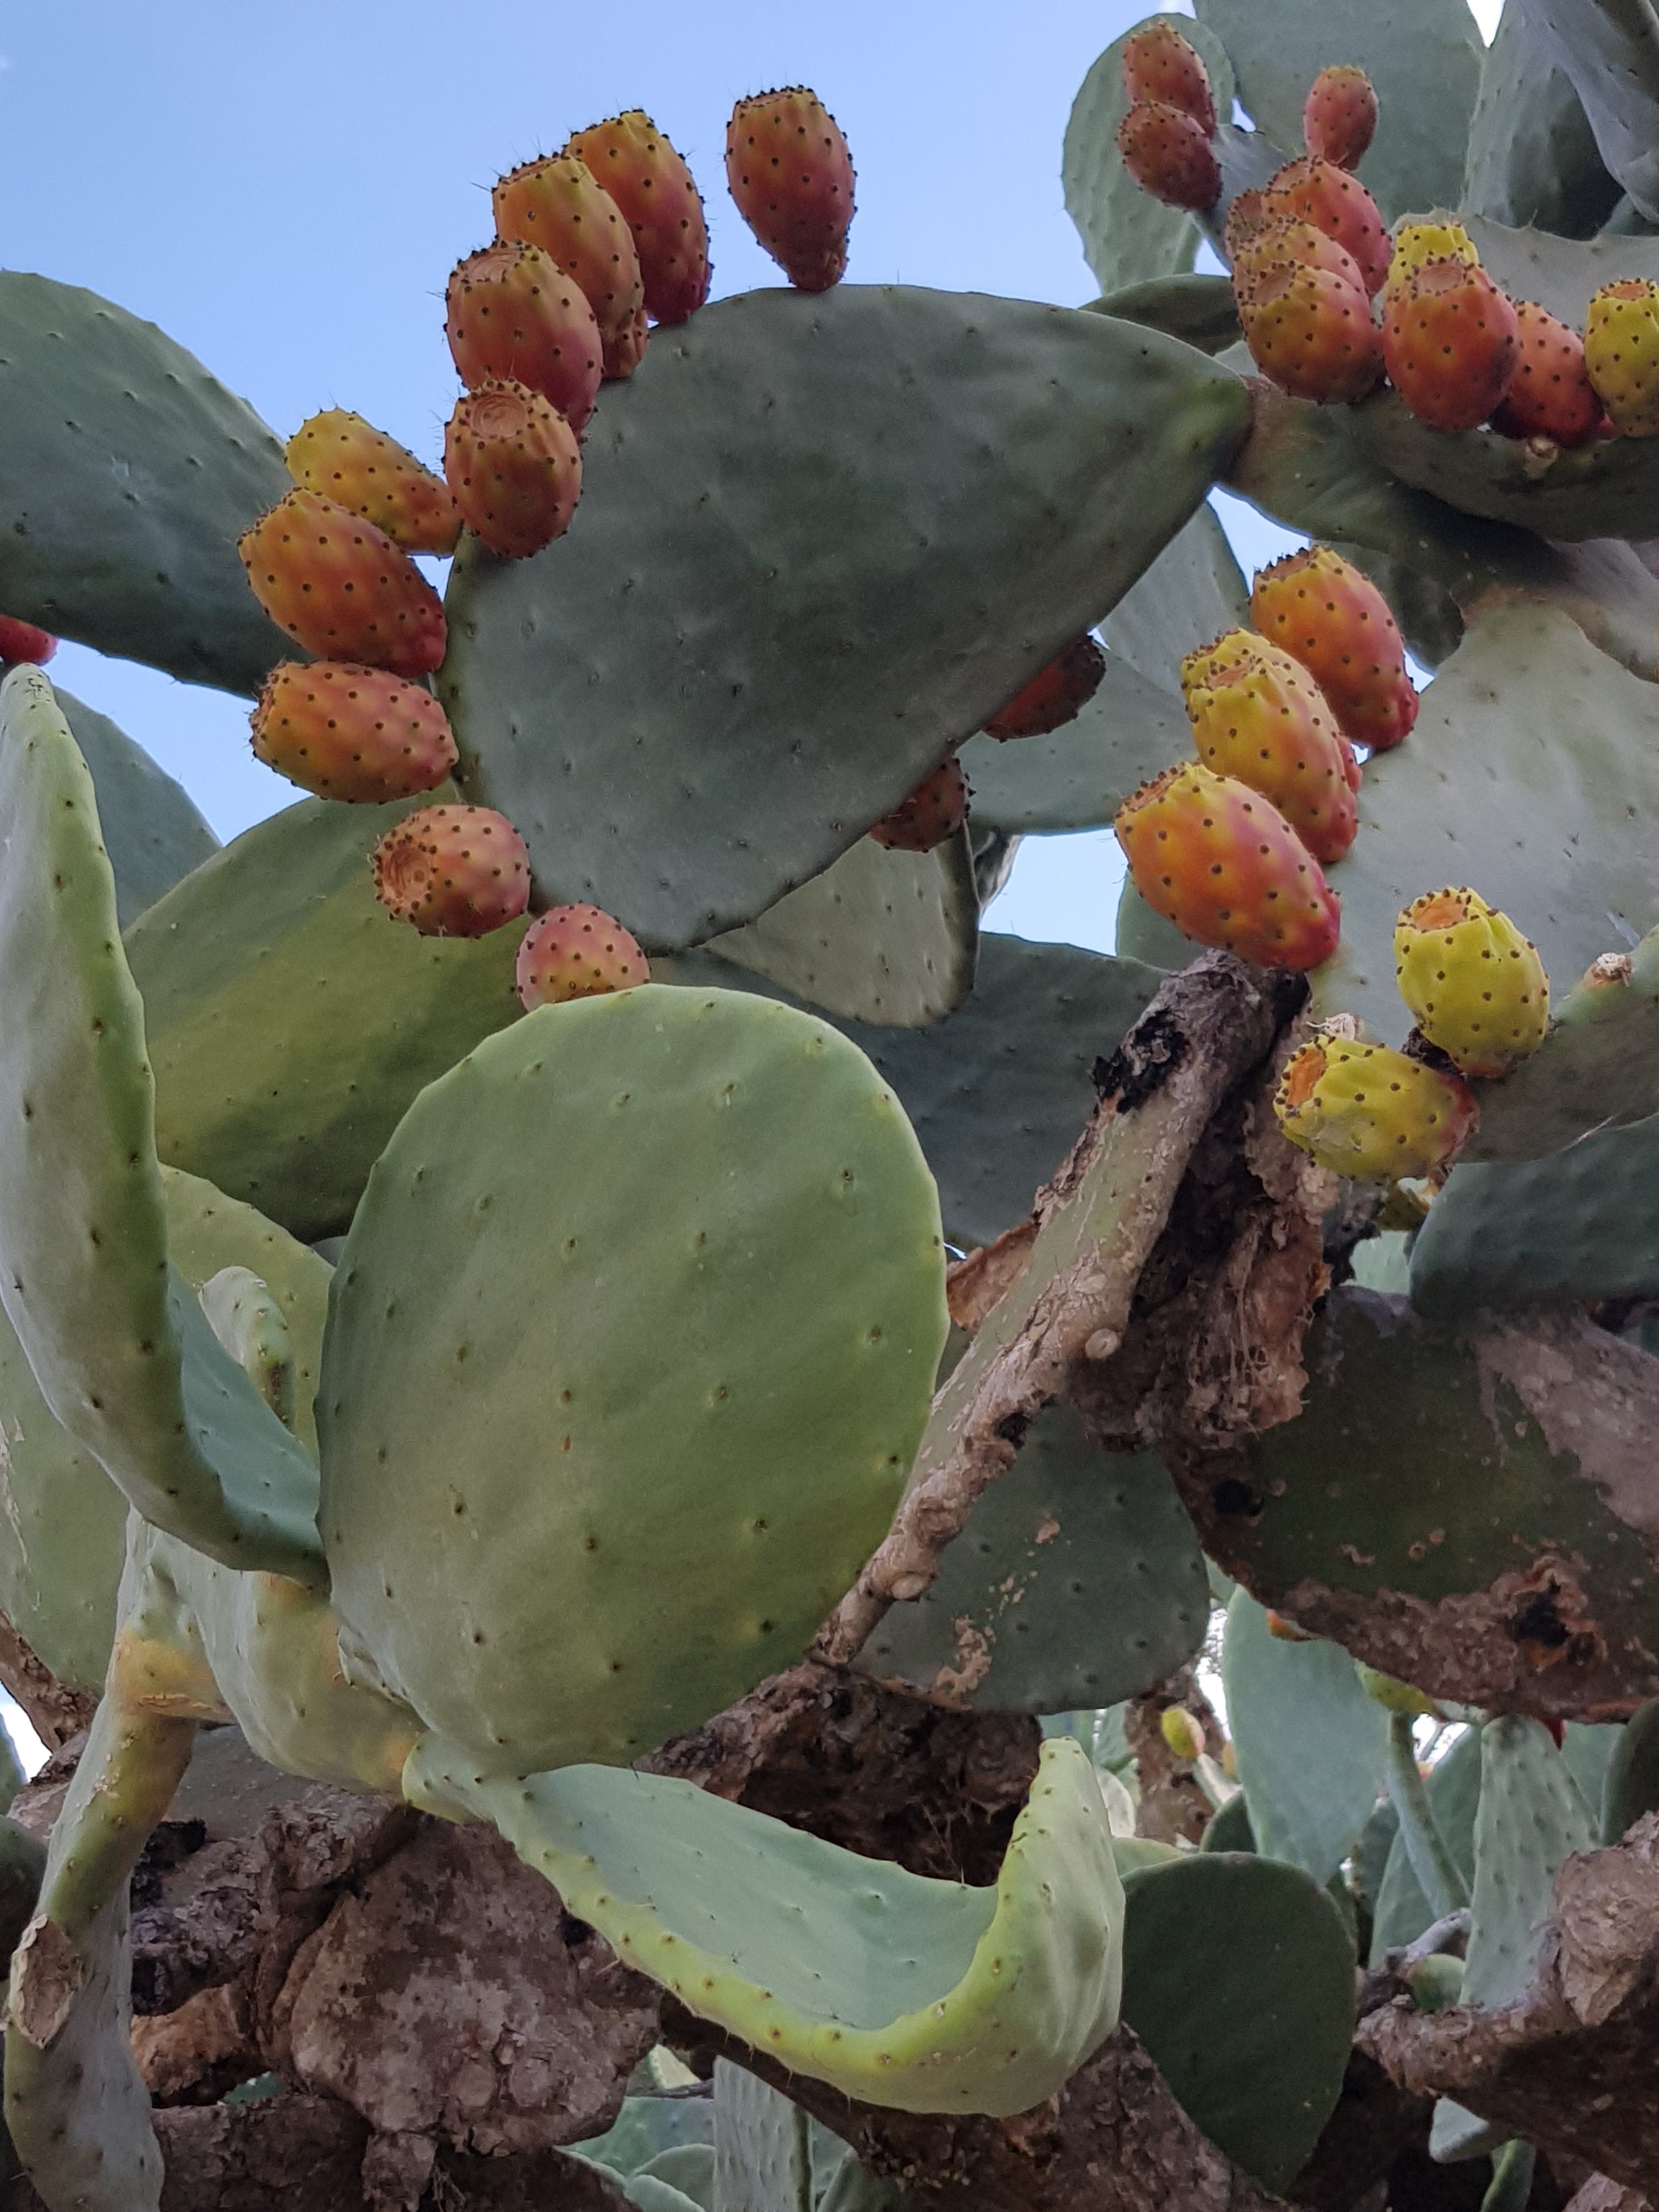 Late summer is the perfect time to indulge in the fruits of the island's prickly pears